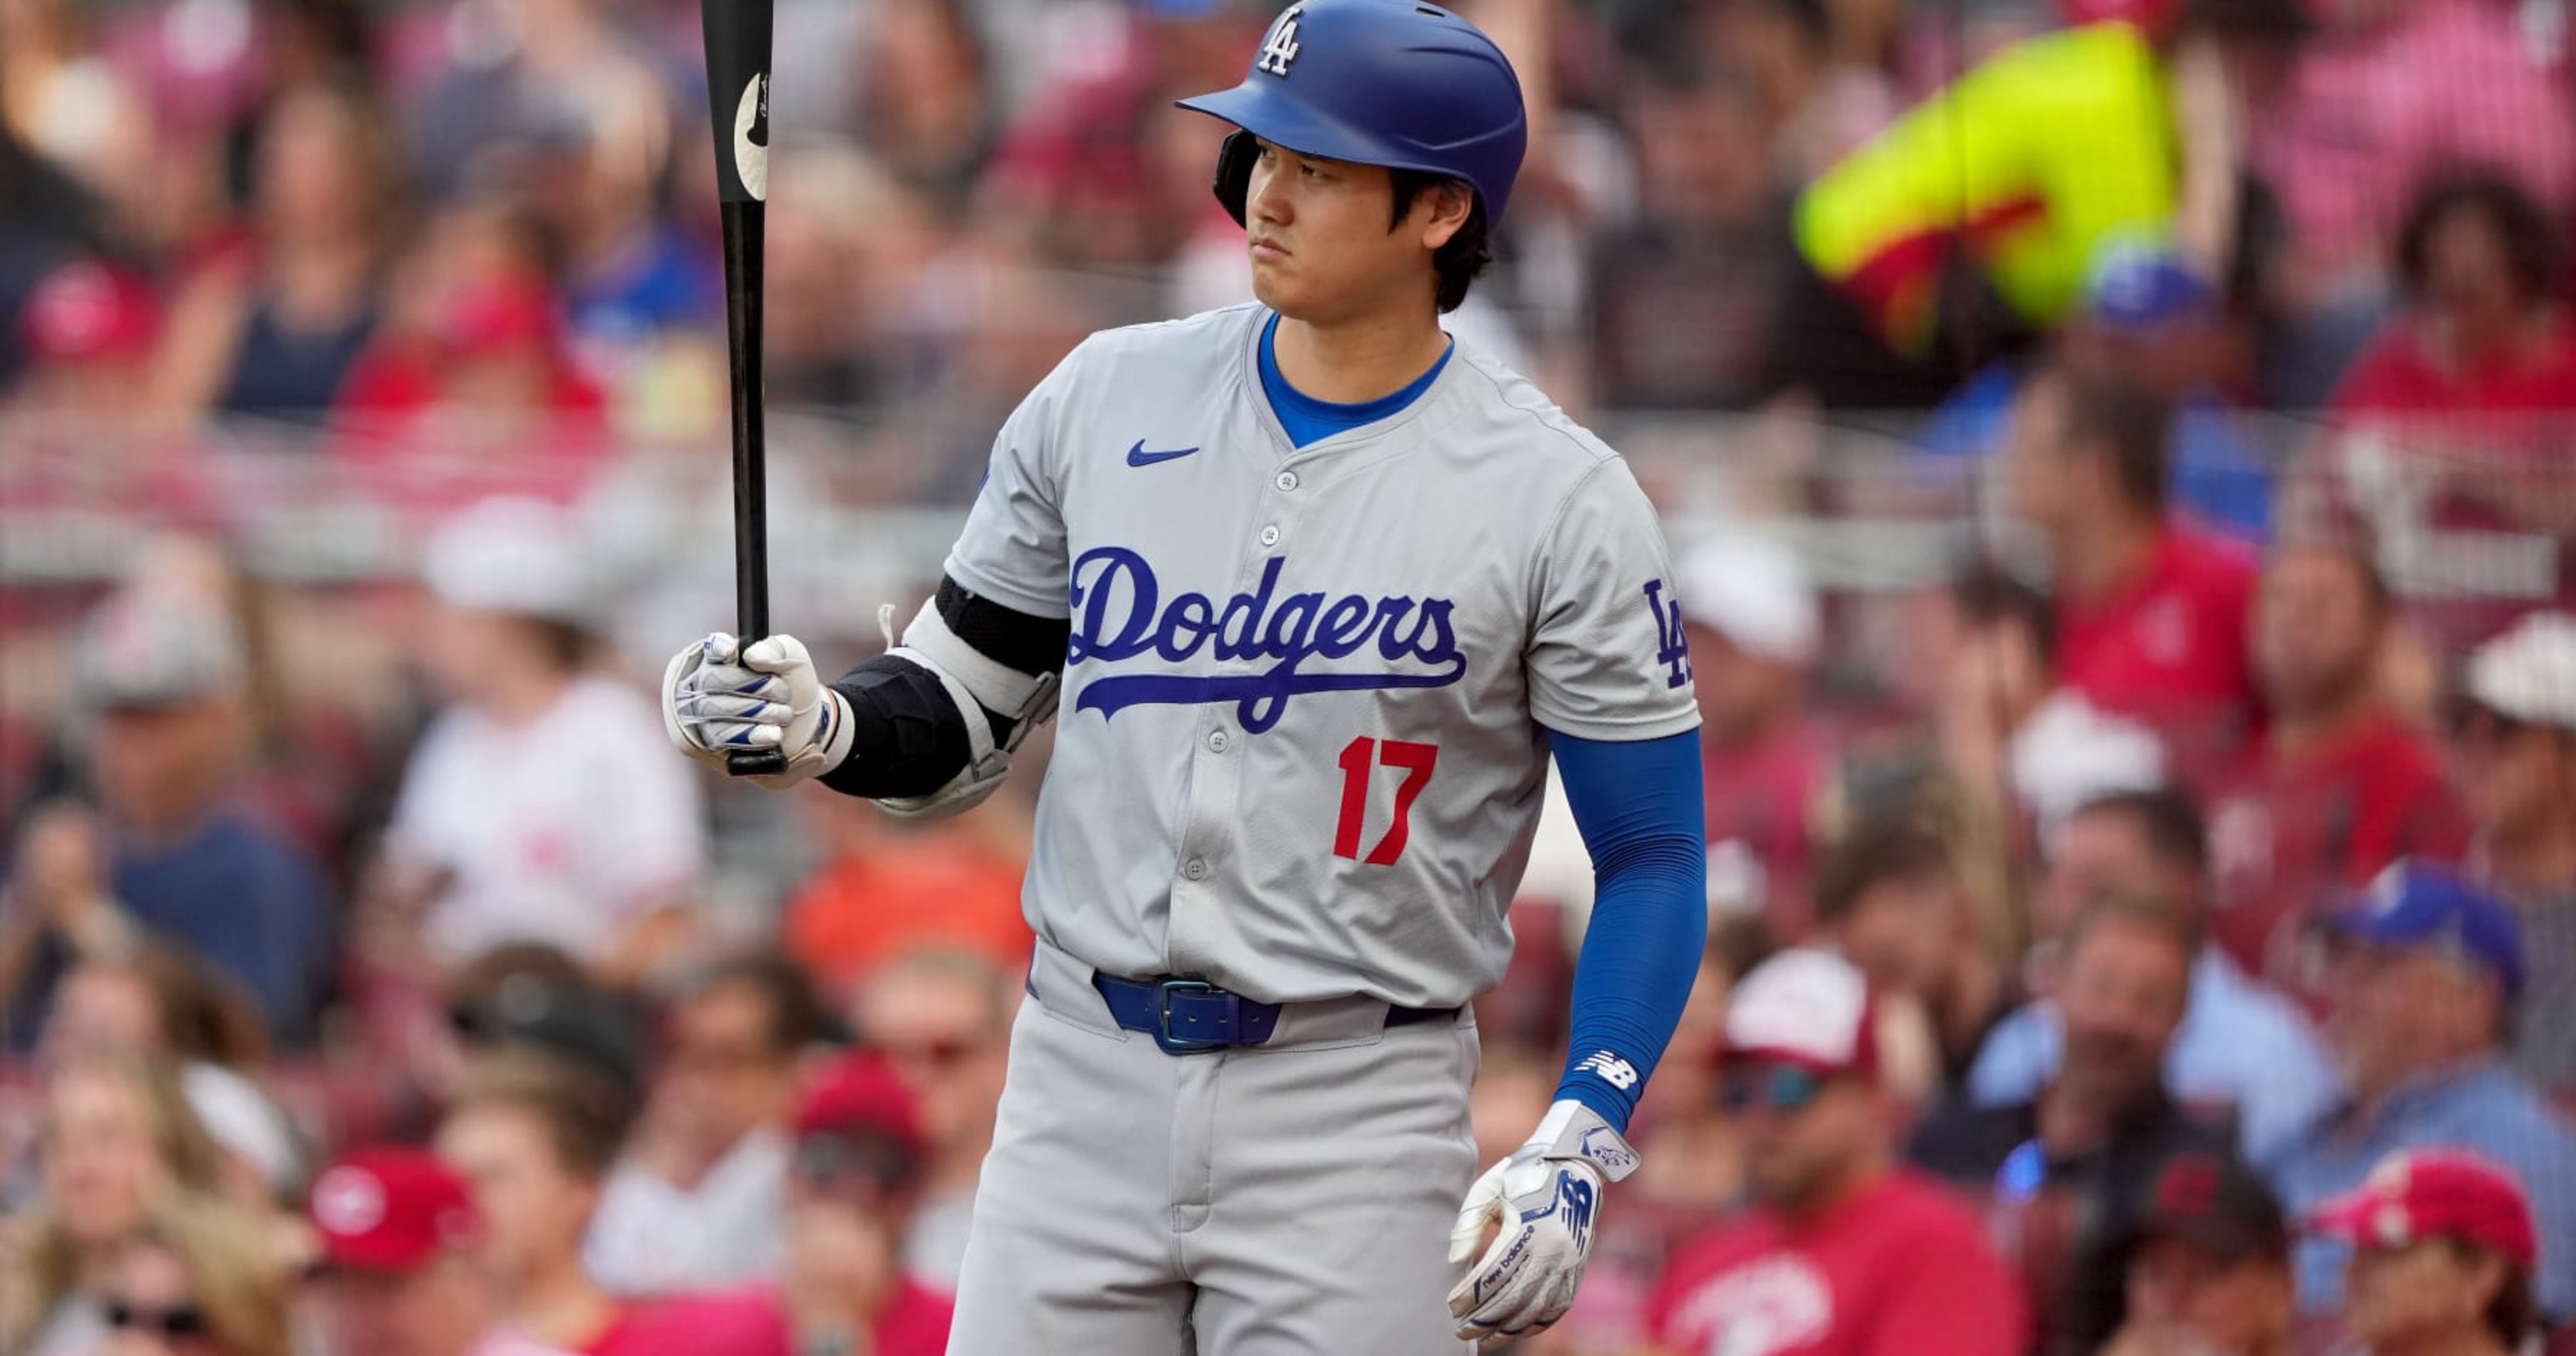 Dodgers' Shohei Ohtani Playing Through Hamstring Injury, Manager Dave Roberts Says